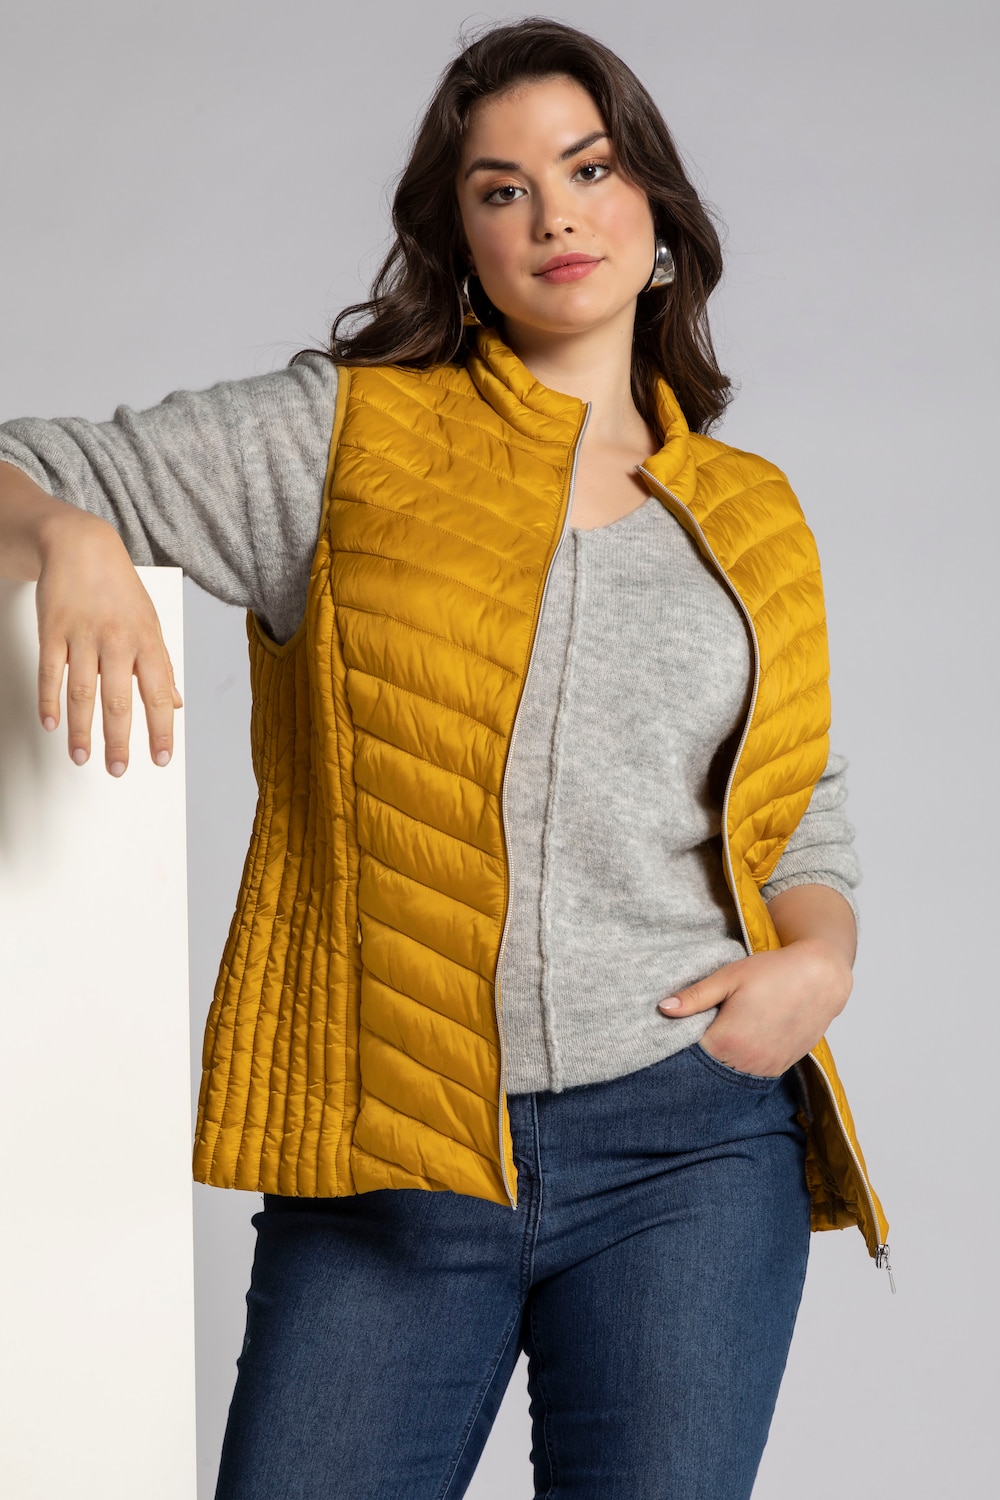 Plus Size Lightweight Zip Front Quilted Fully Lined Vest, Woman, yellow, size: 20/22, synthetic fibers, Ulla Popken